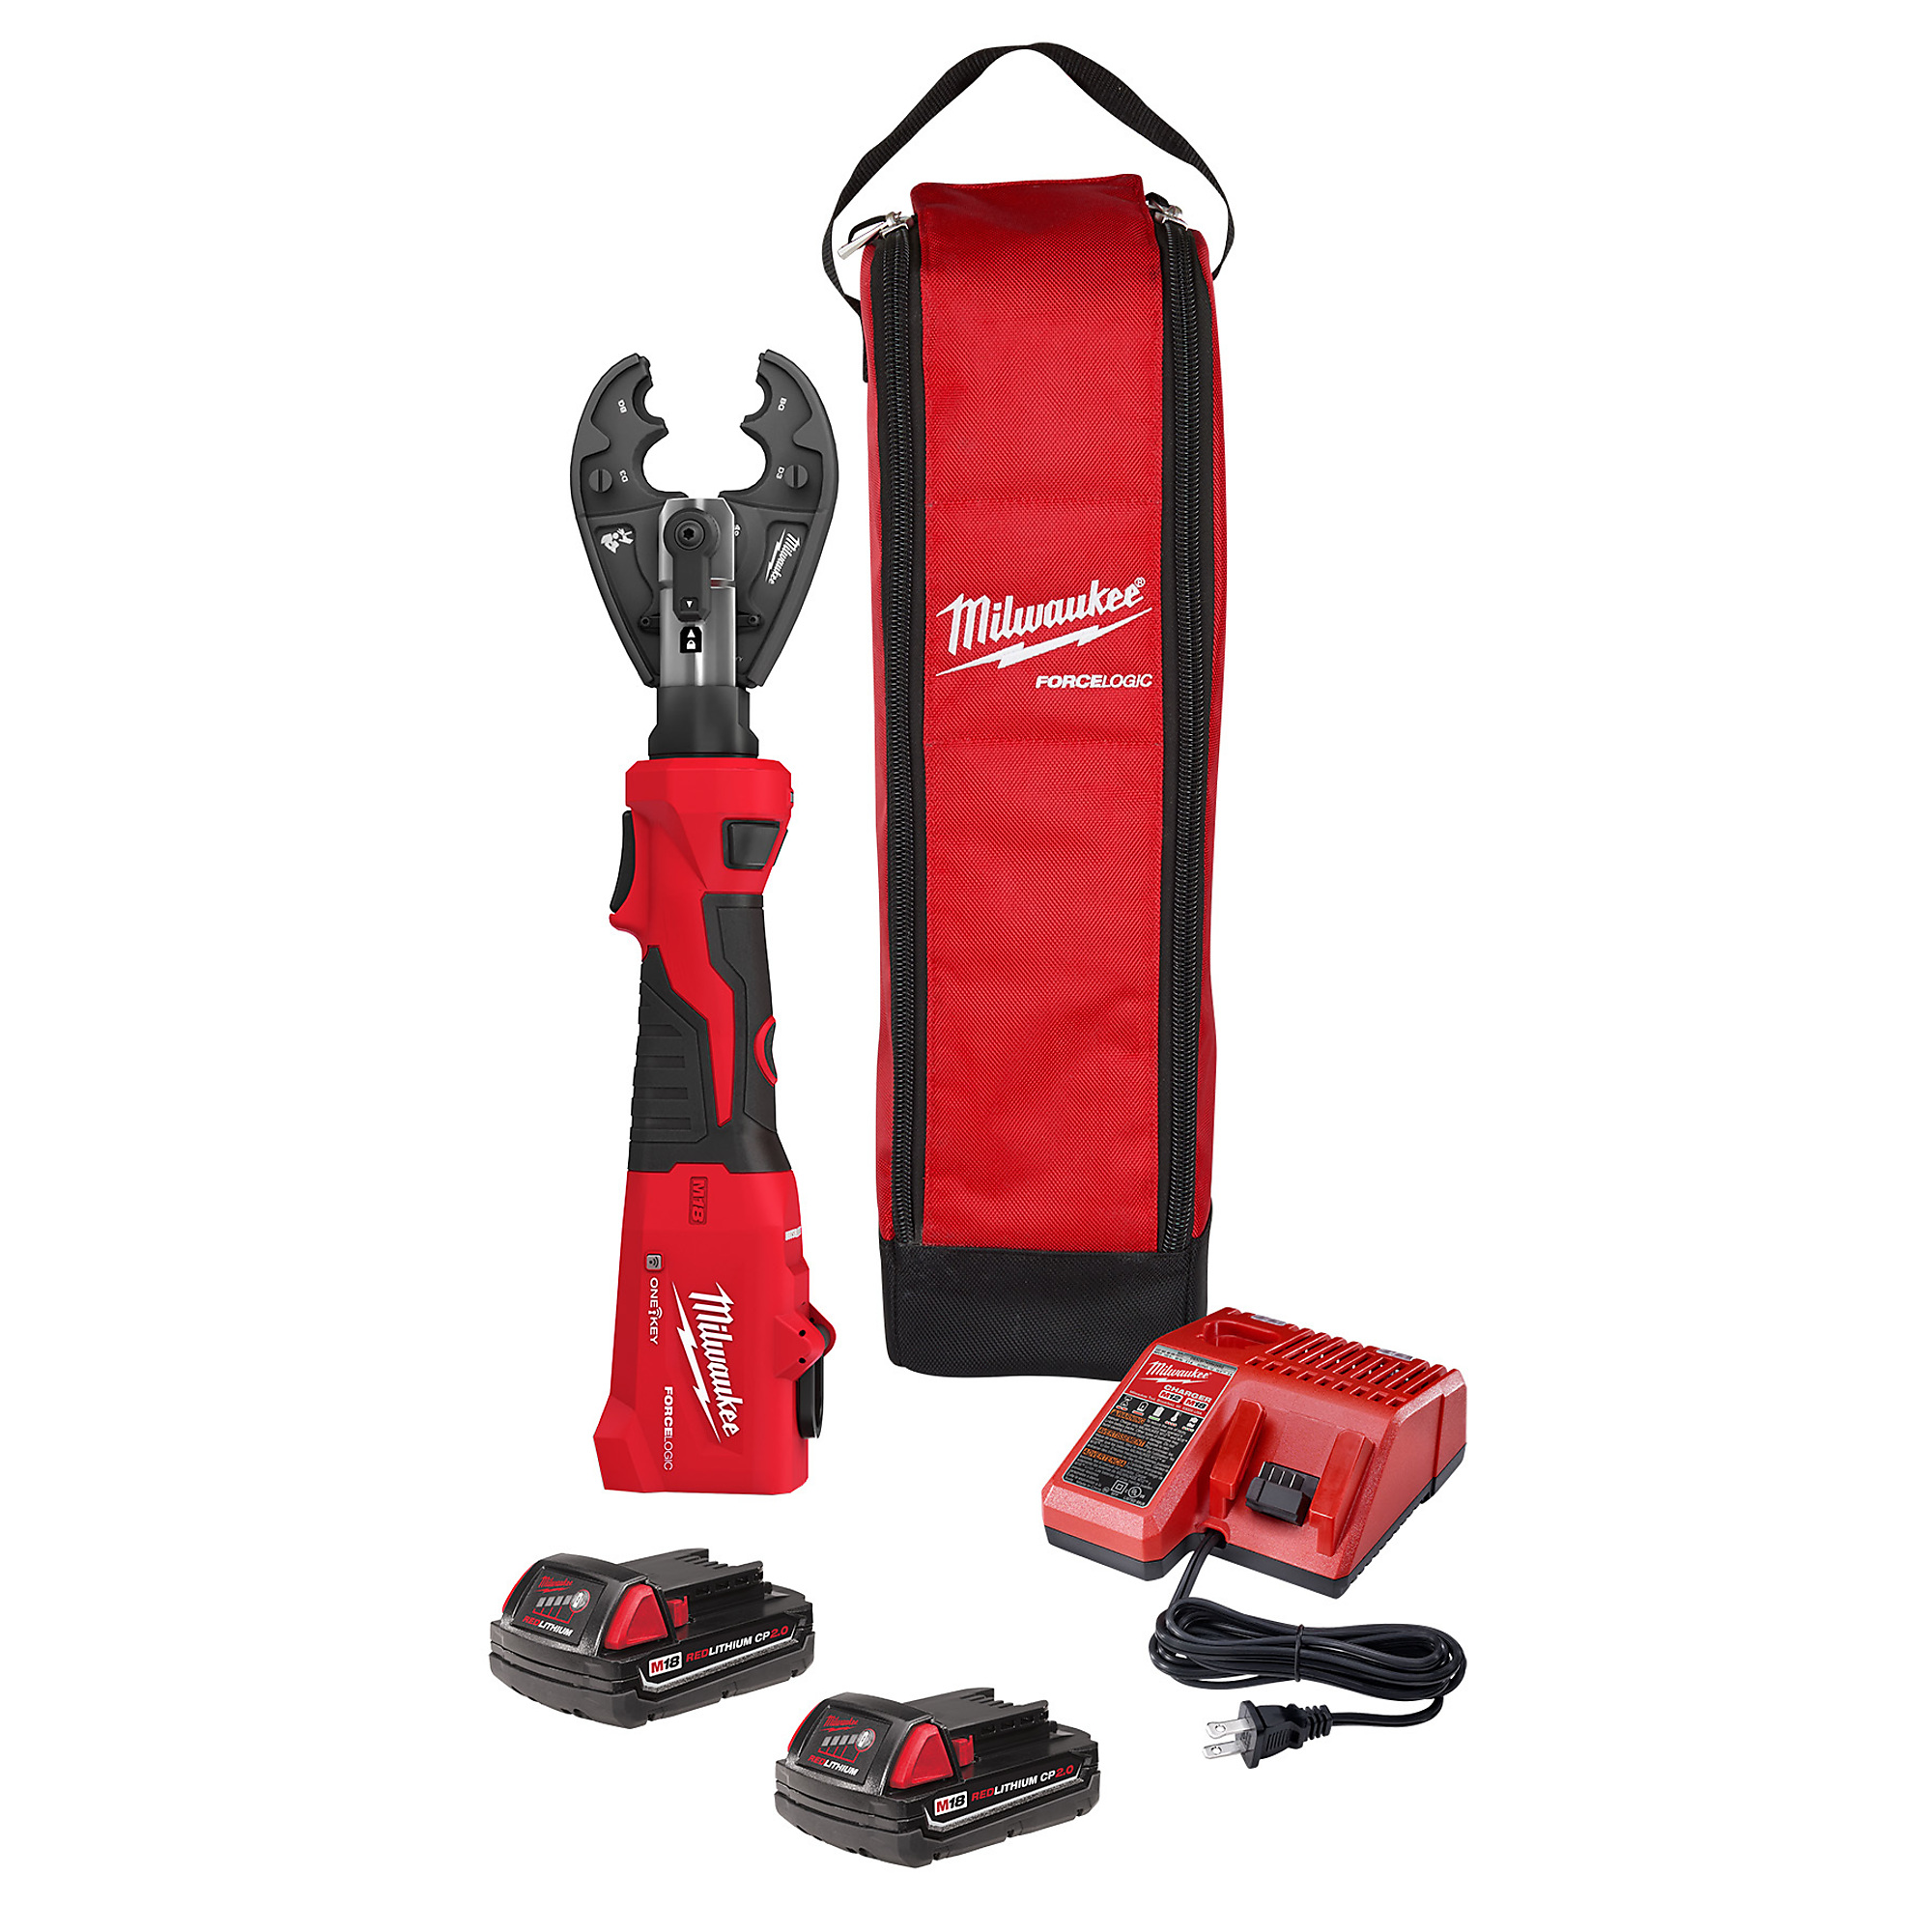 Milwaukee M18 FORCE LOGIC , M18 FORCE LOGIC 6T Linear Utility Crimper Kit w/ BG-D3 Jaw, Chuck Size Multiple in, Tools Included (qty.) 1, Model 2978-